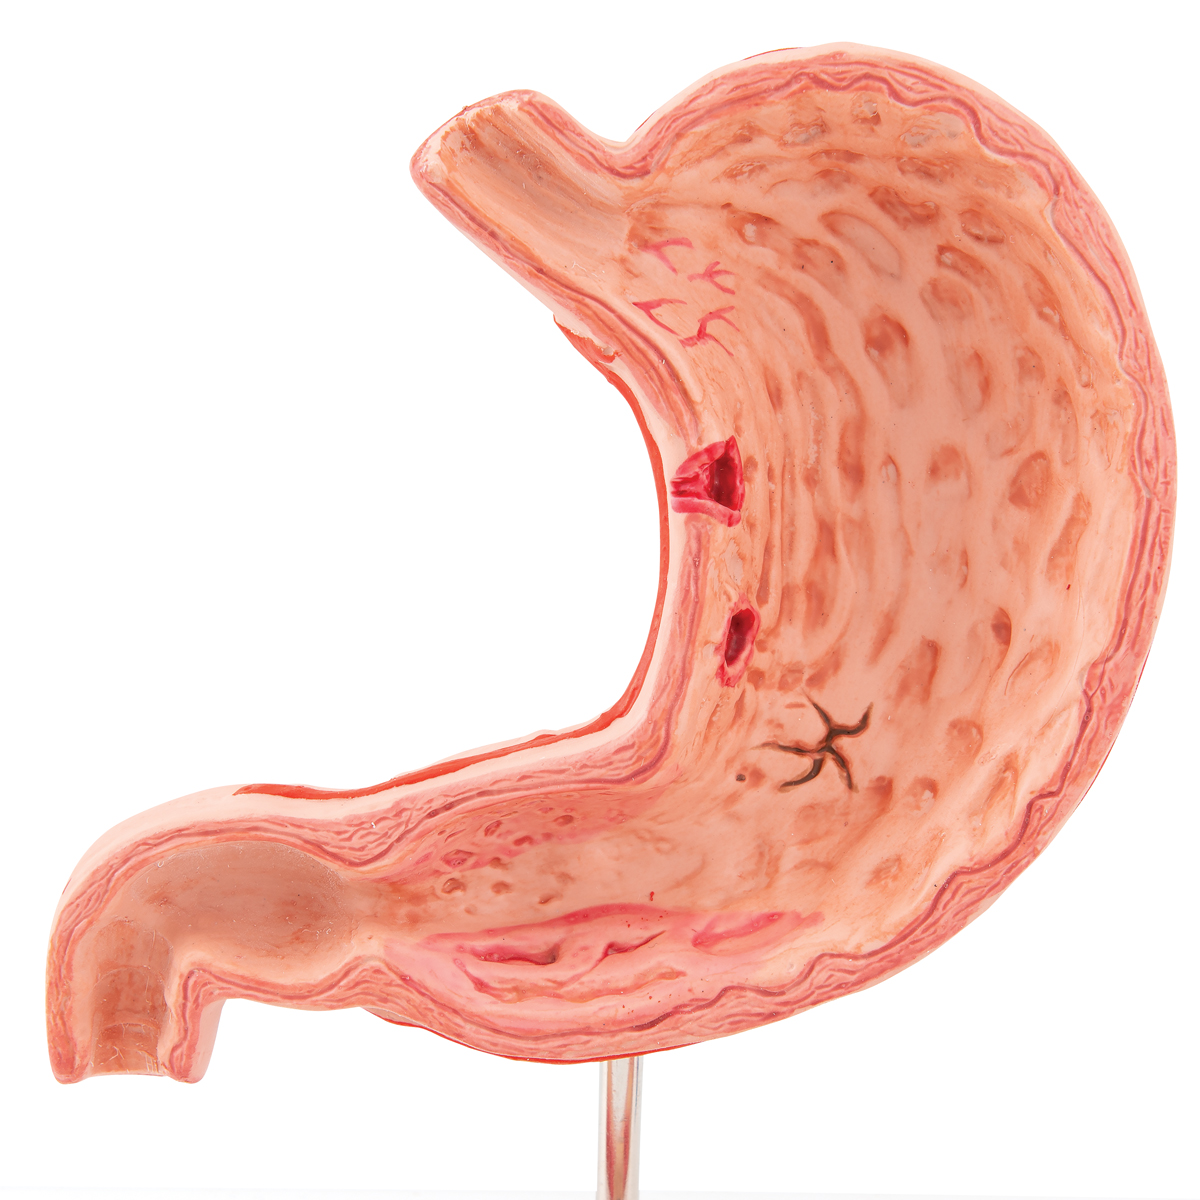 Anatomical Teaching Models Plastic Human Digestive Models Stomach With Ulce...